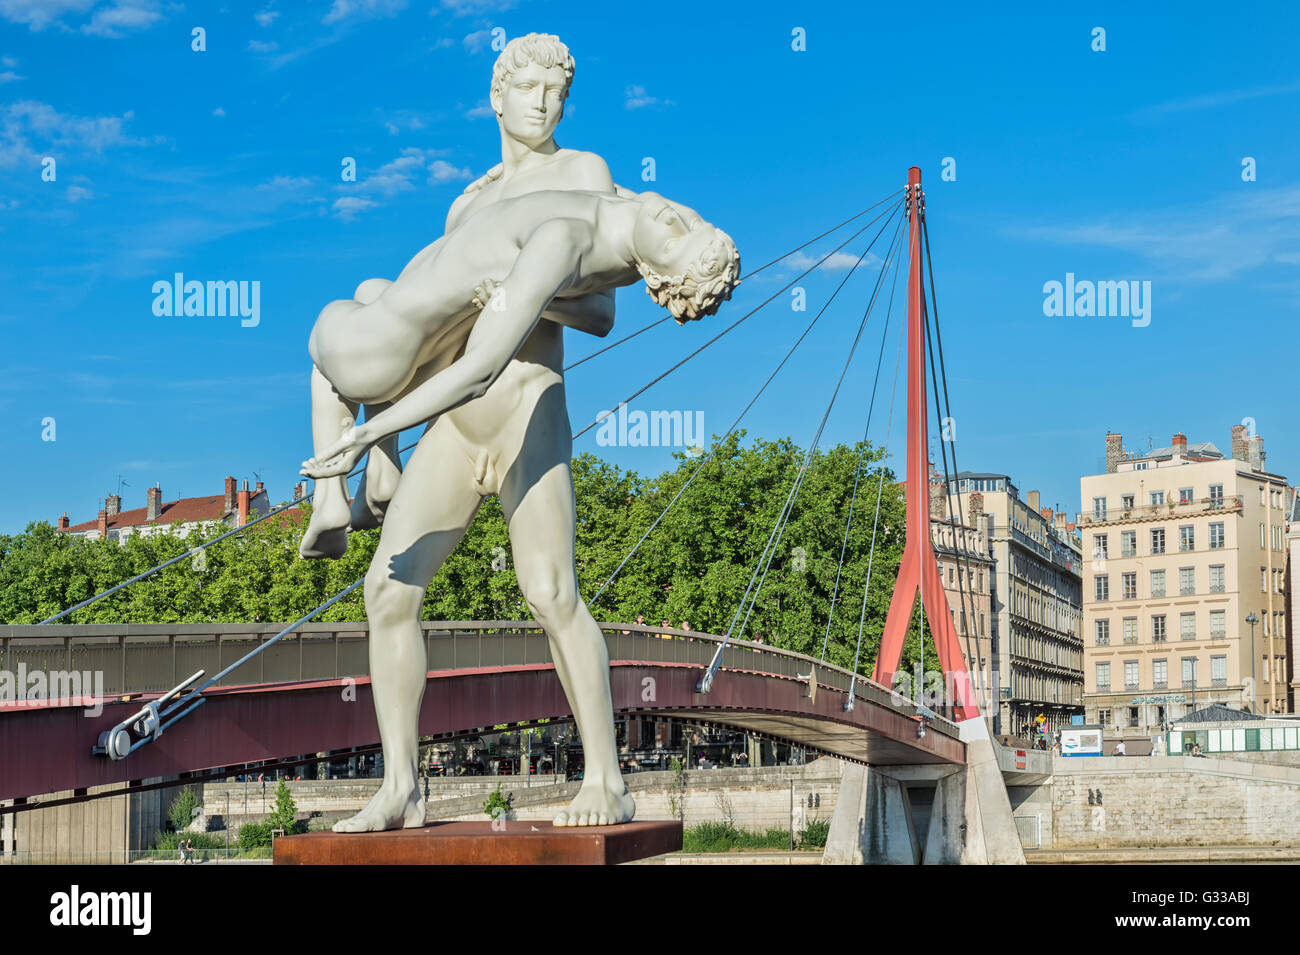 The Weight of Oneself statue on the Saone Banks near the Palais de Justice footbridge, Lyon, Rhone, France Stock Photo